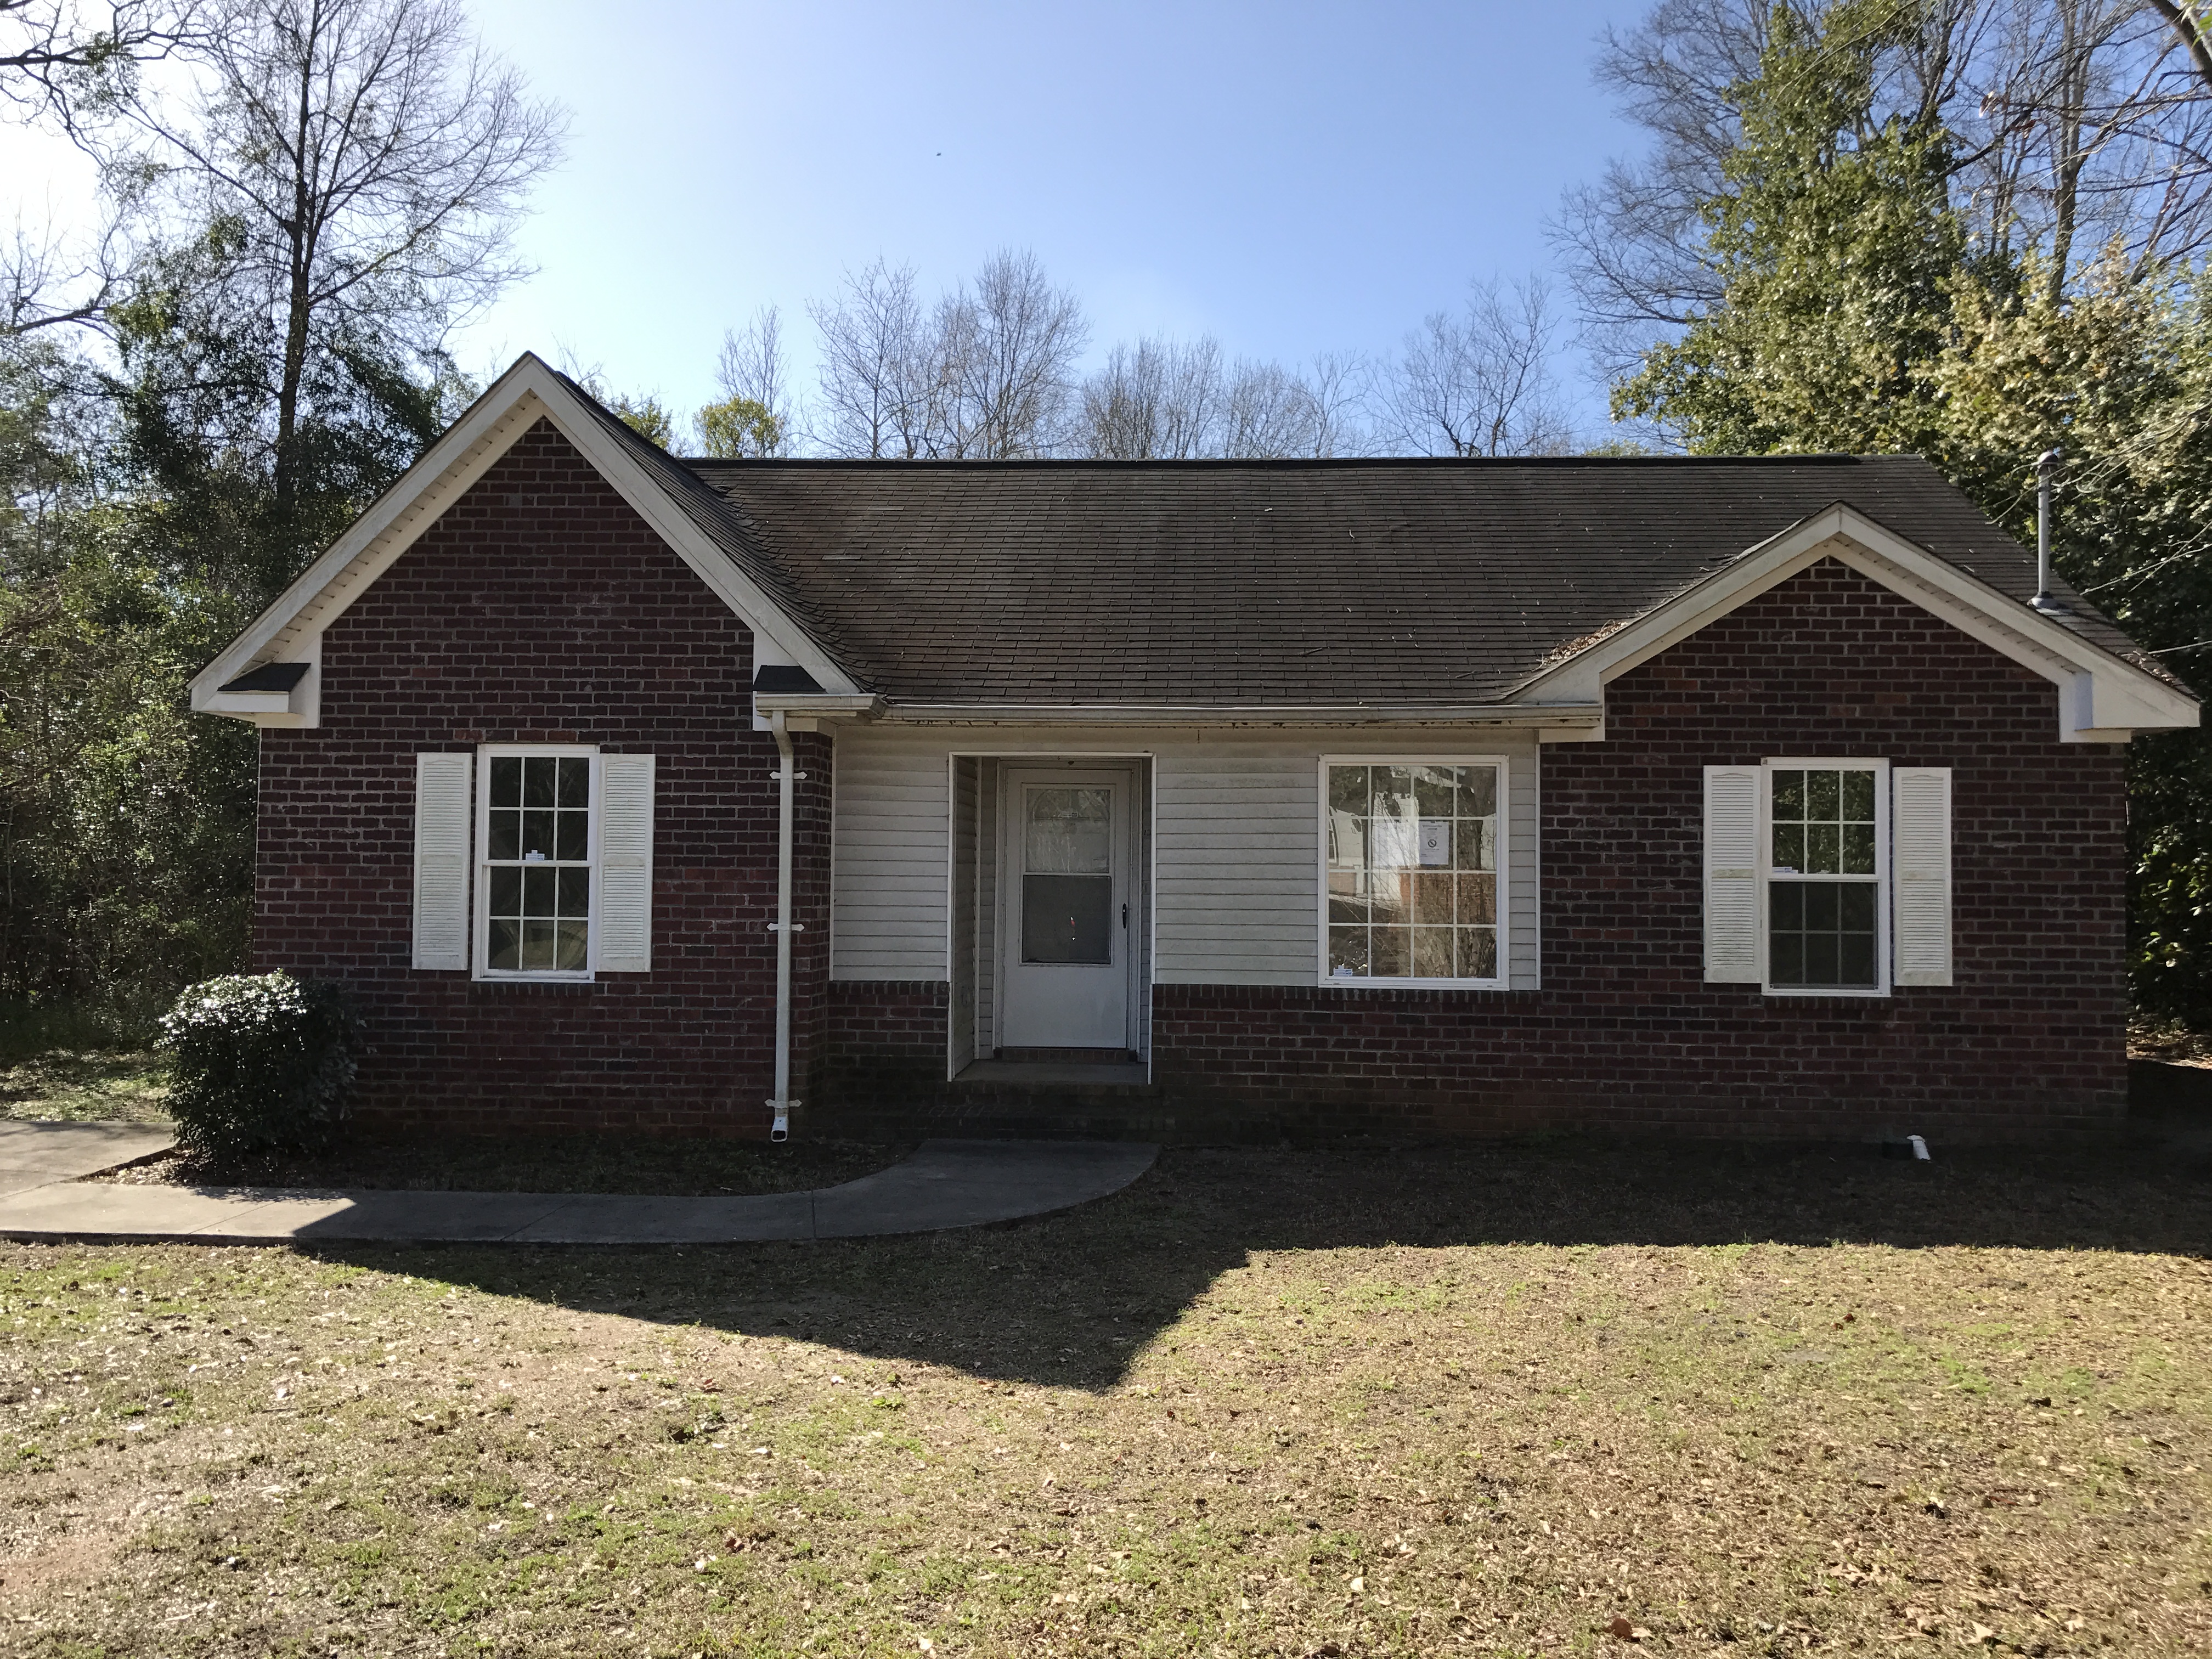 12 W Bee StSumter, SC, 29150Sumter County